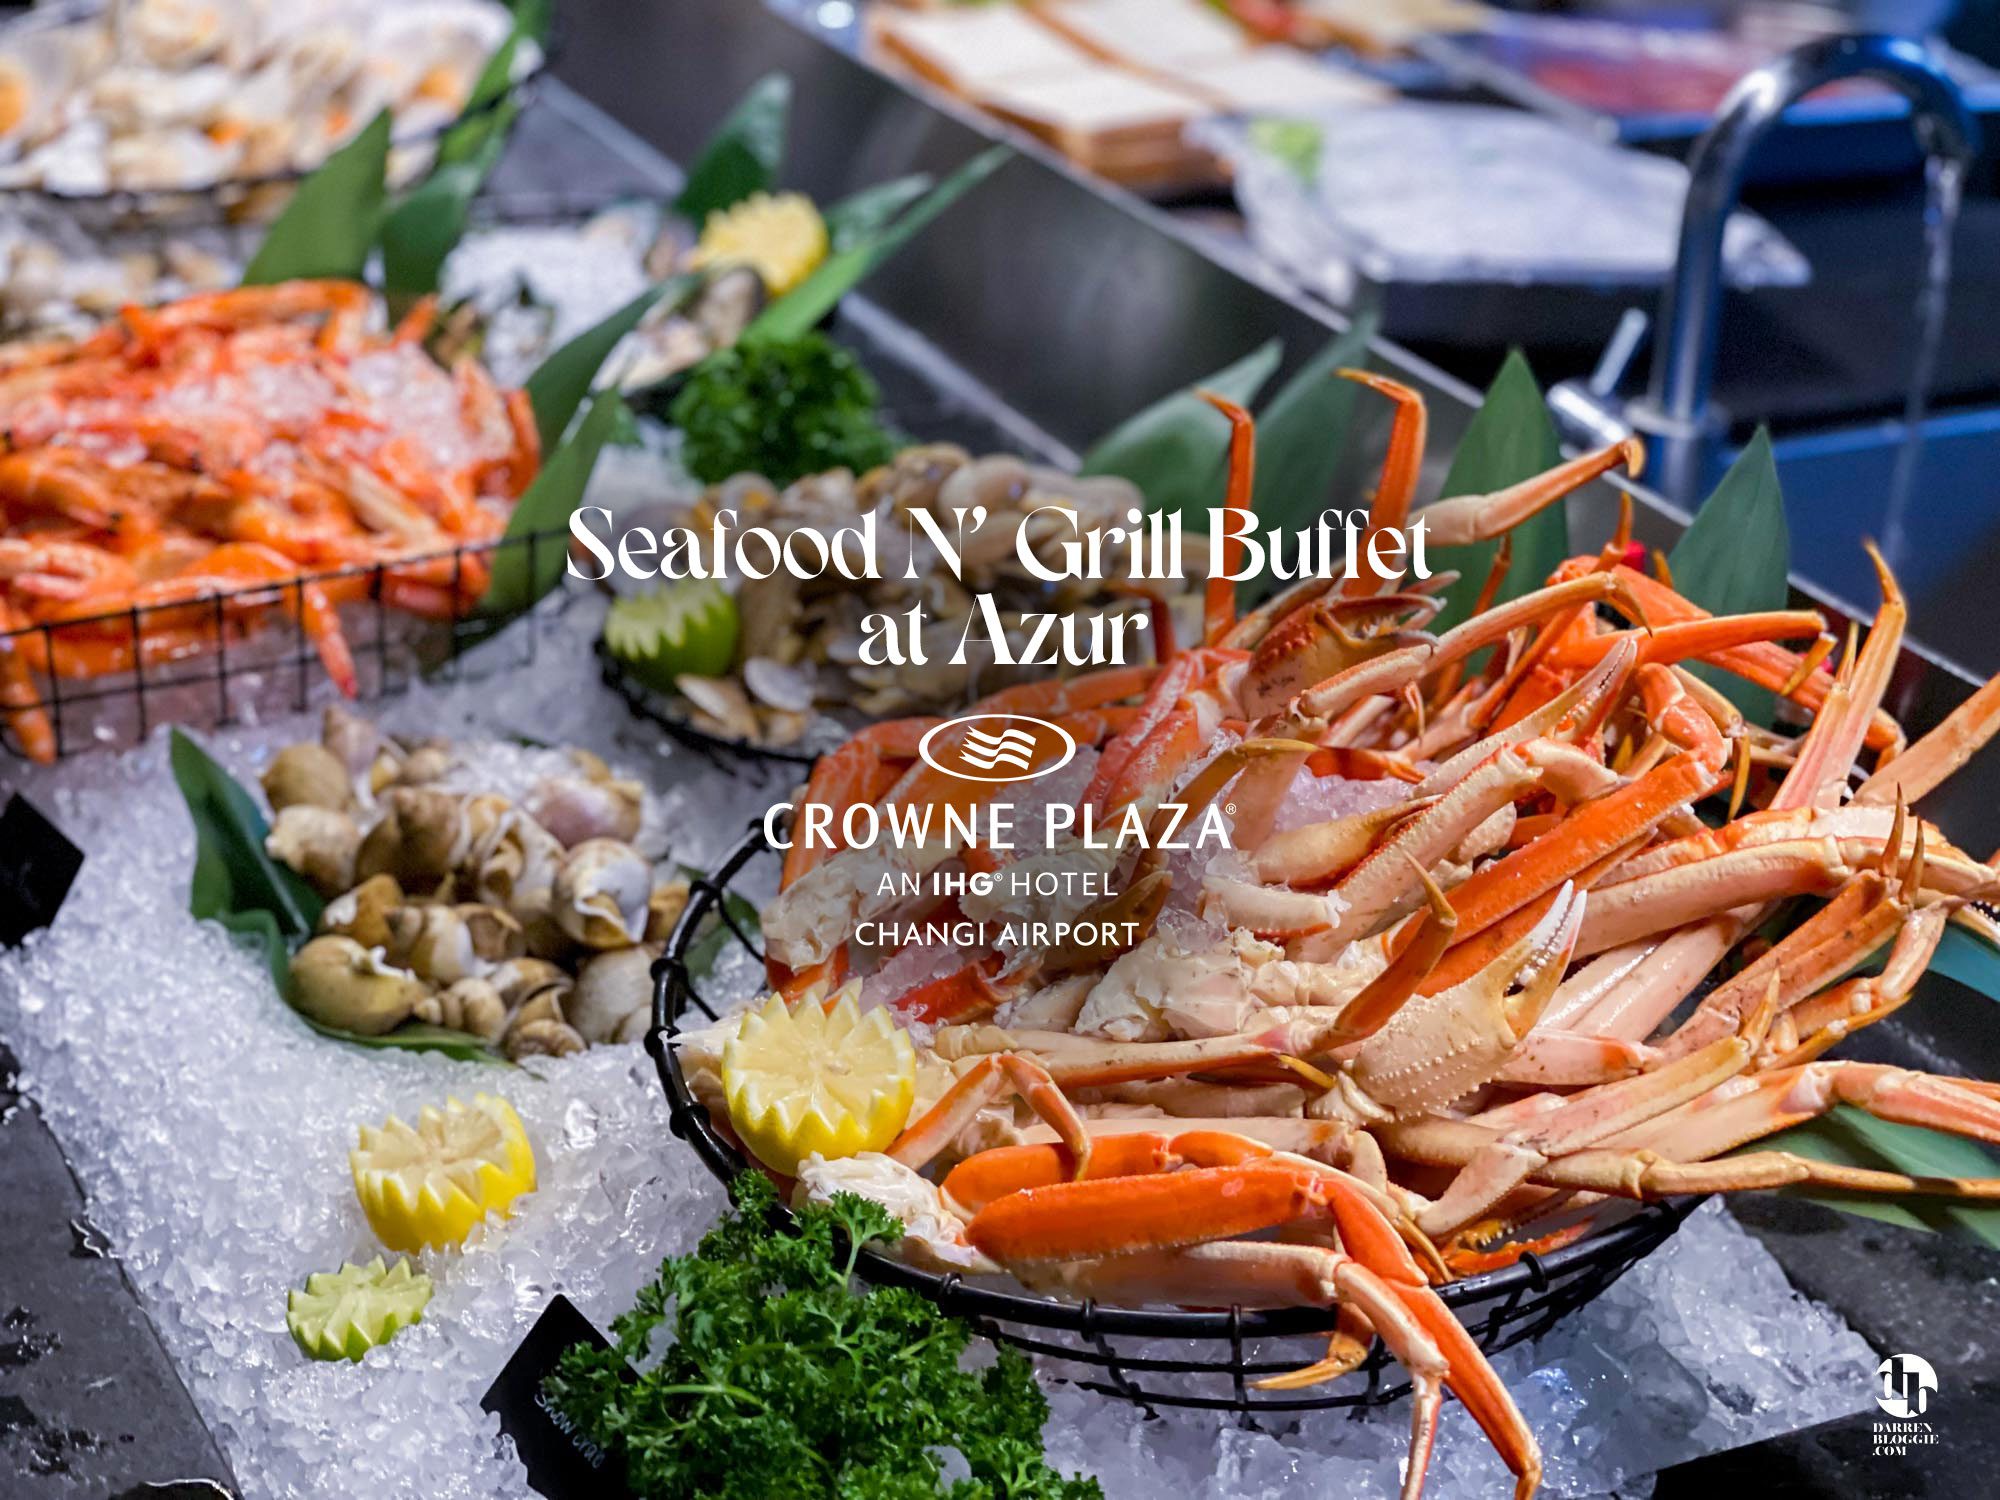 Seafood-and-Grill-Buffet-at-Azur-Crowne-Plaza-darrenbloggie-_6080-featured